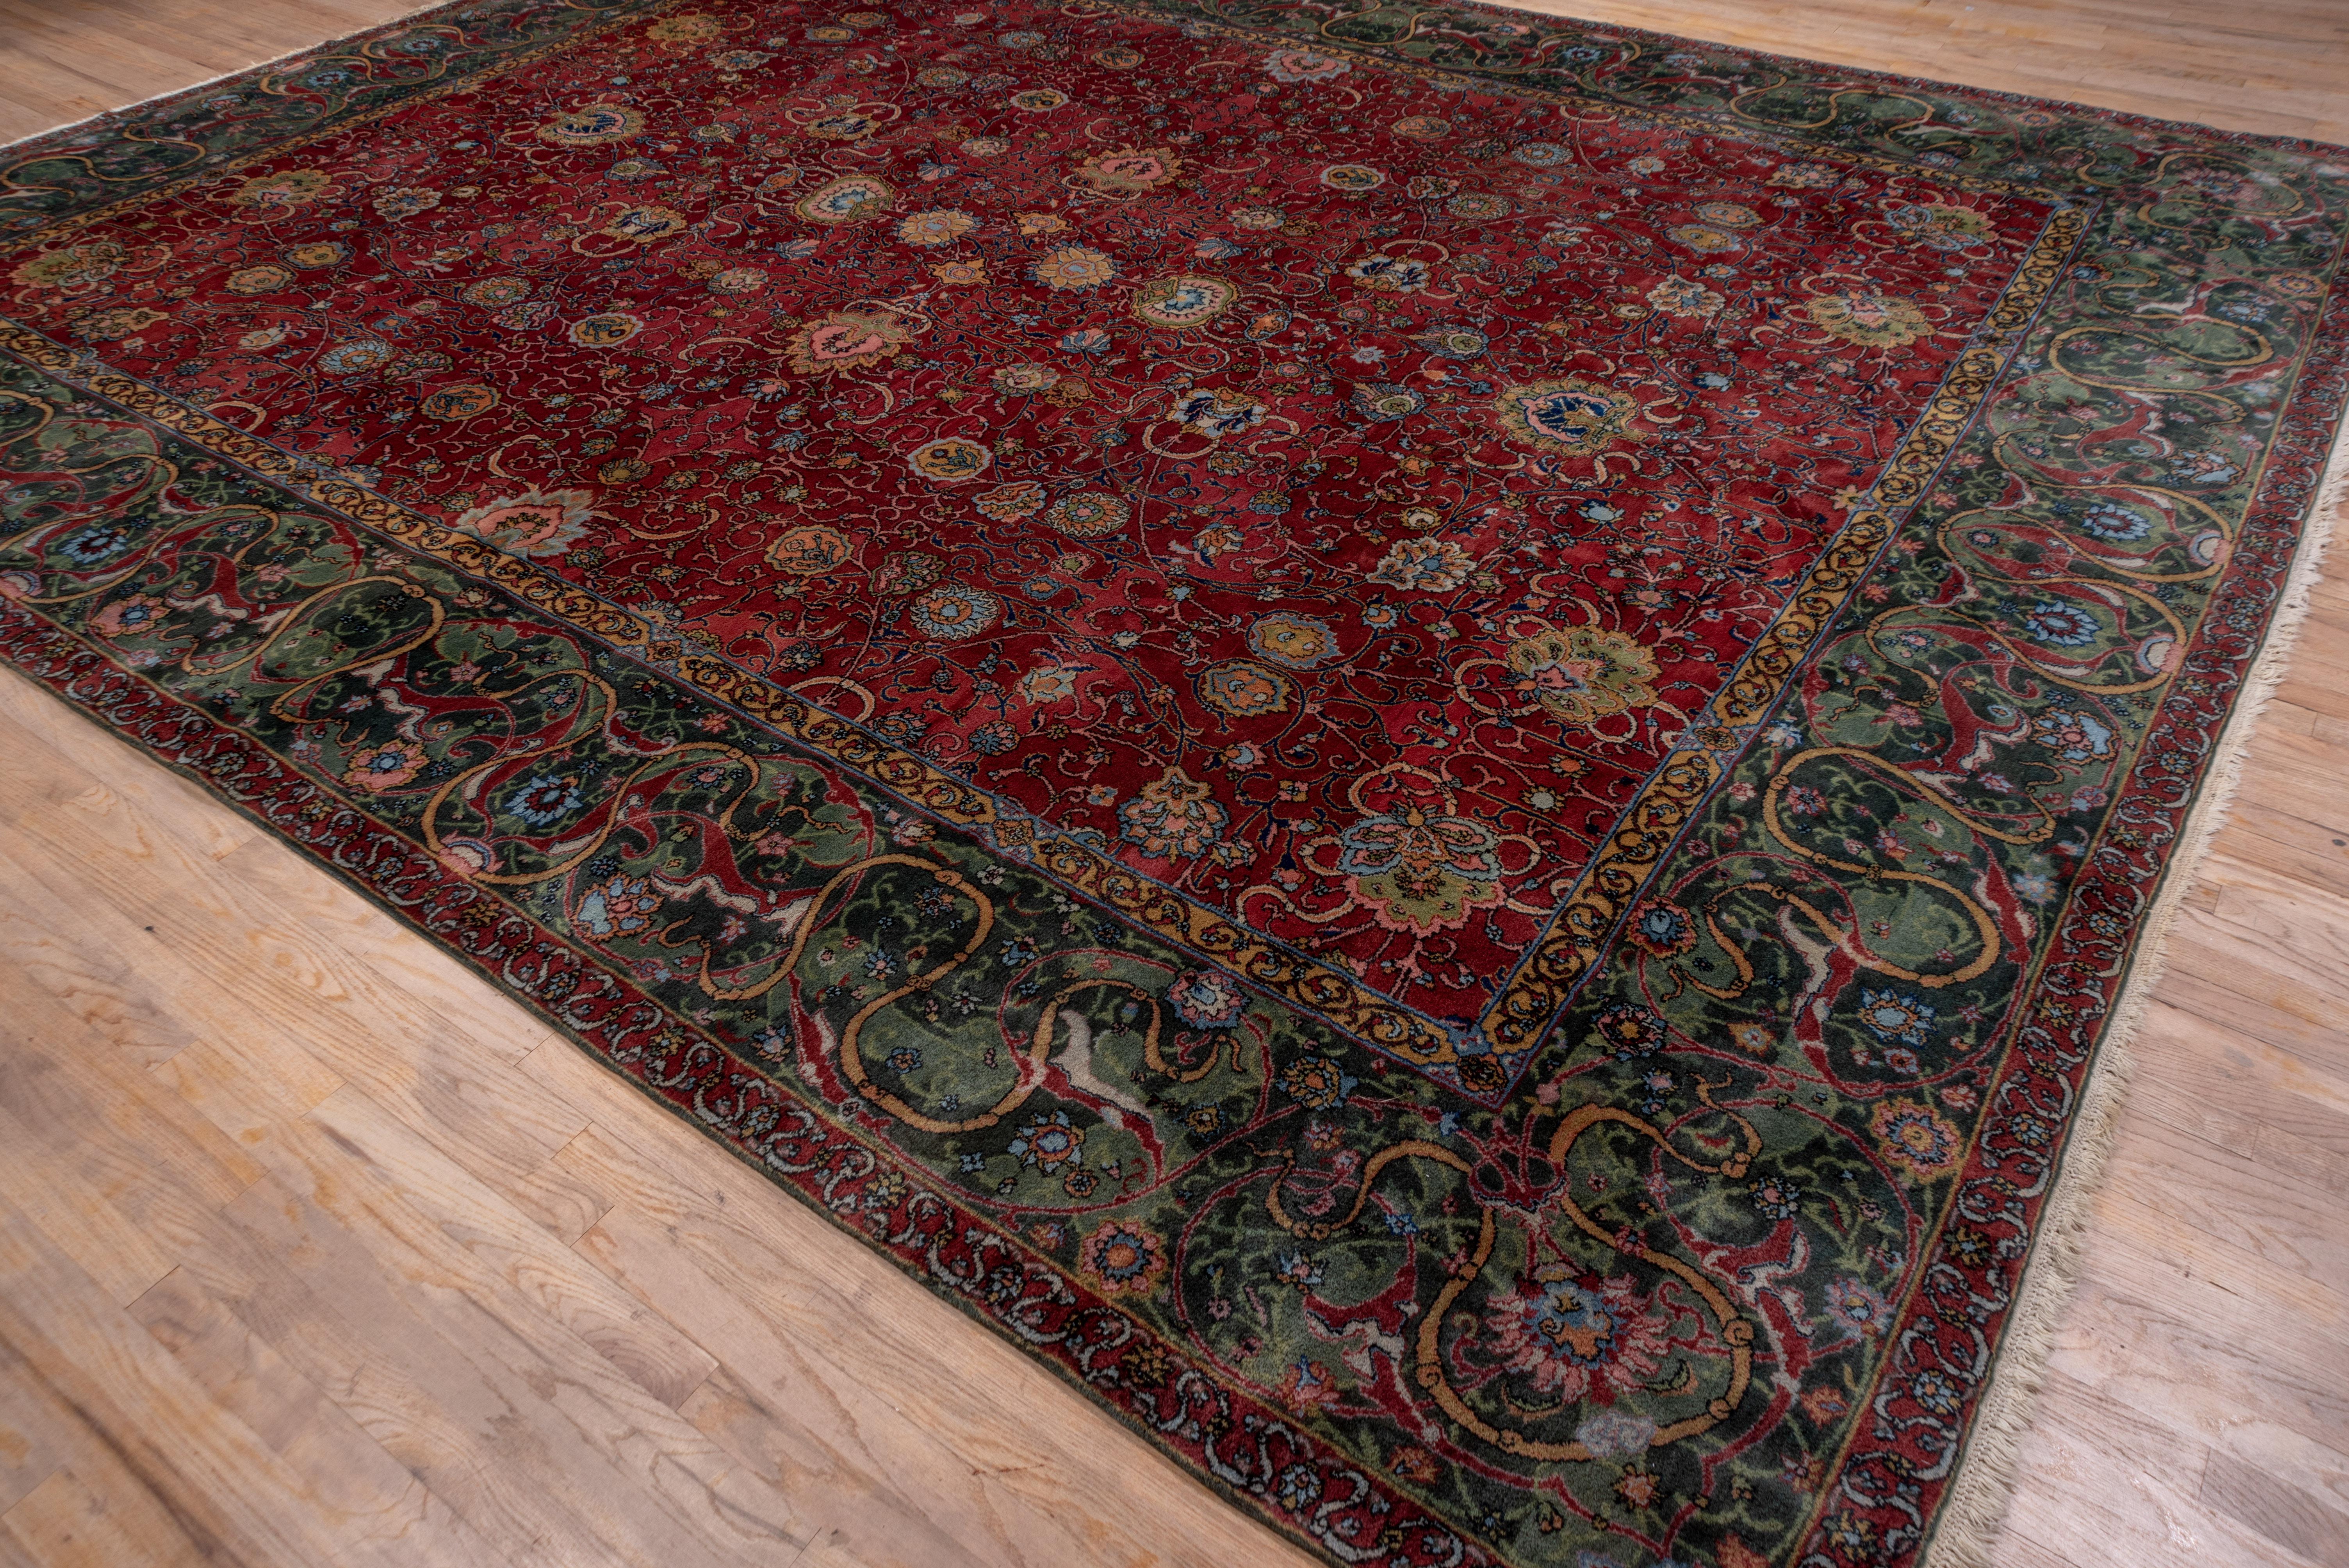 1920s Antique Indian Lahore Rug, Burgundy All-Over Field, Dark Green Borders For Sale 3